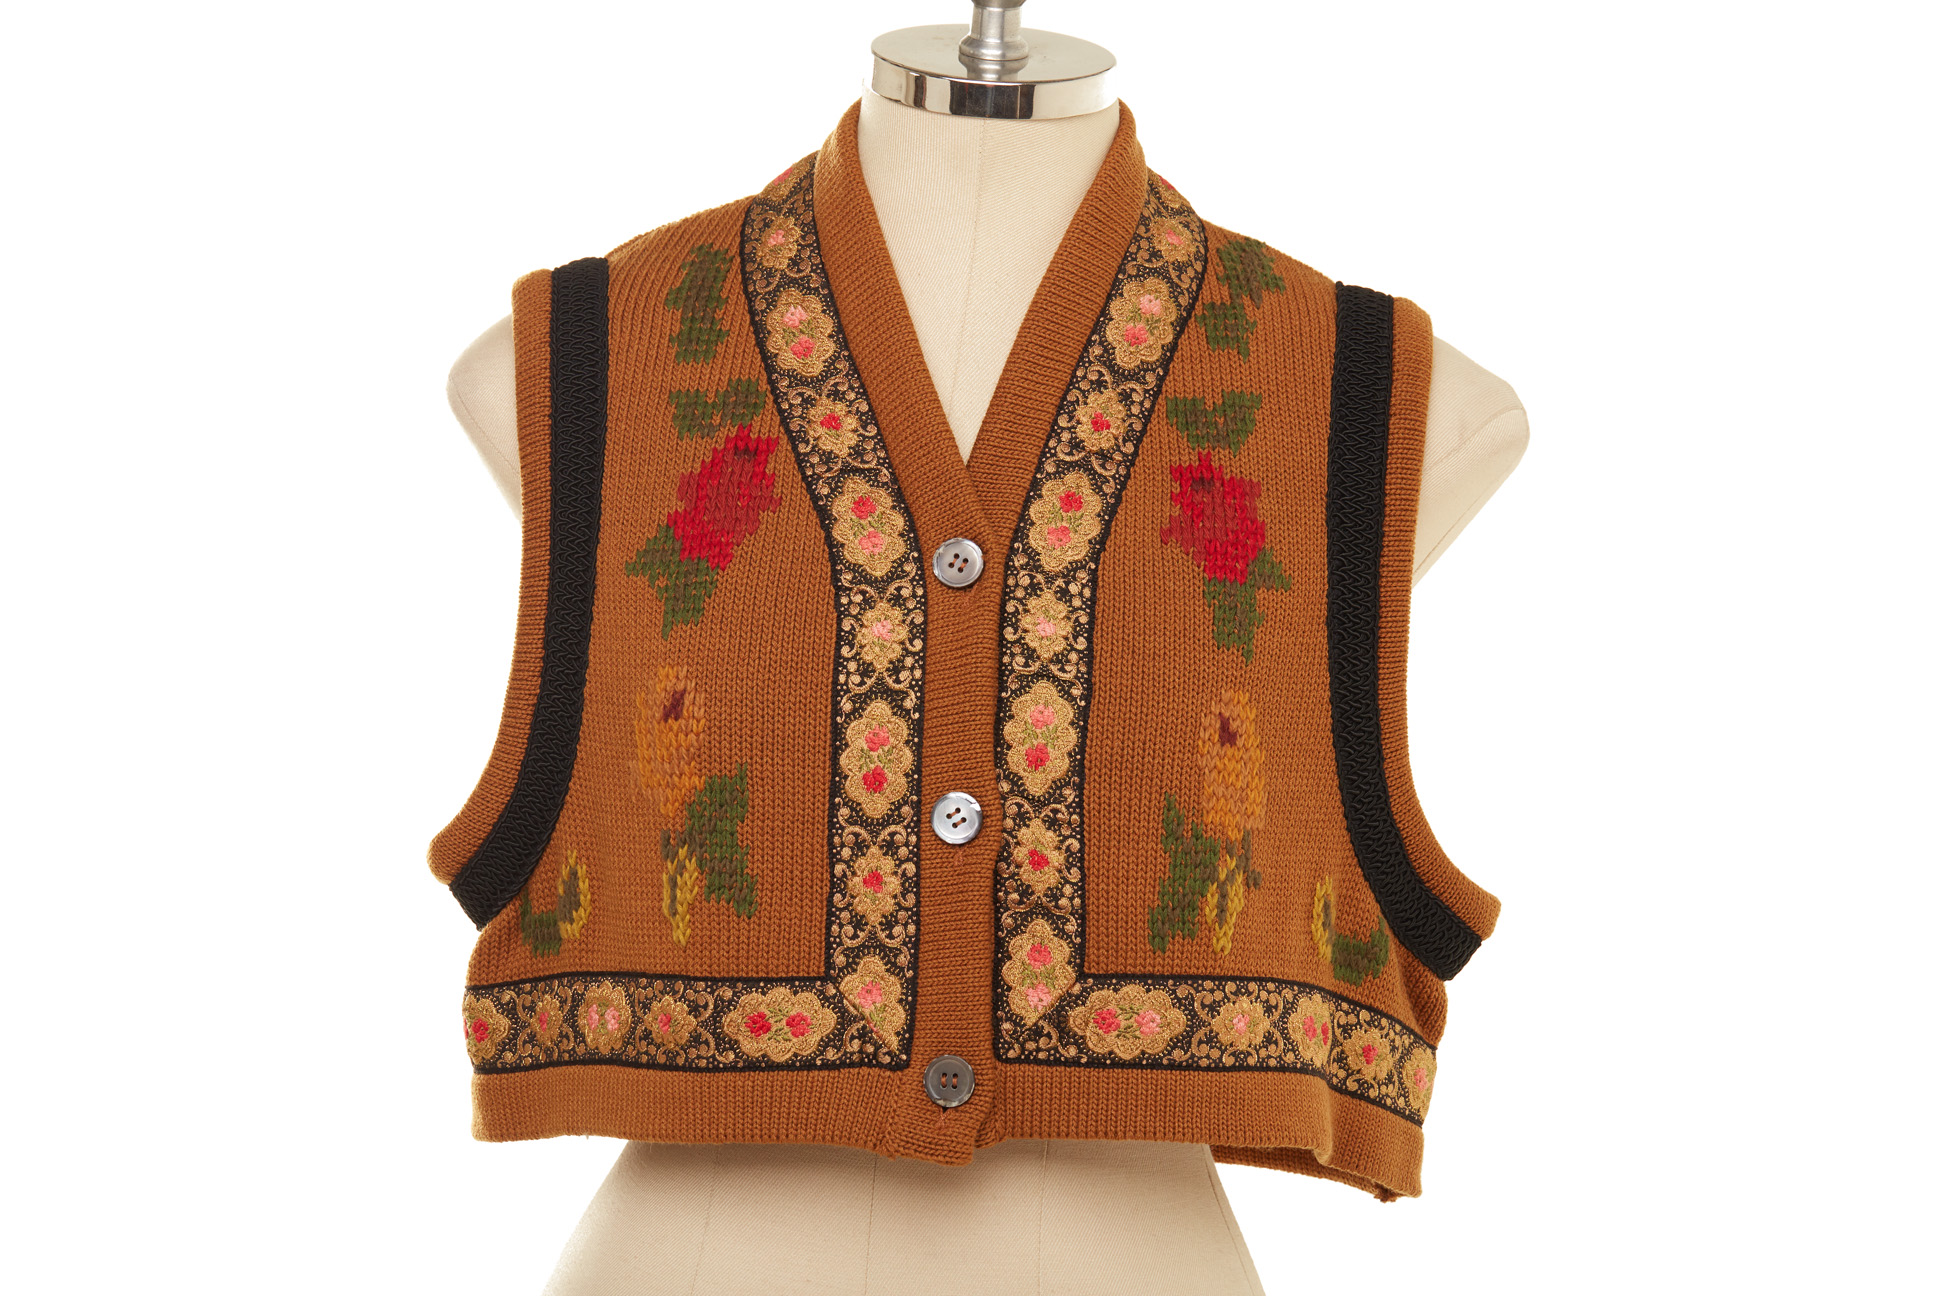 THREE ROMEO GIGLI CALLAGHAN BROWN EMBROIDERED WAISTCOATS - Image 3 of 8